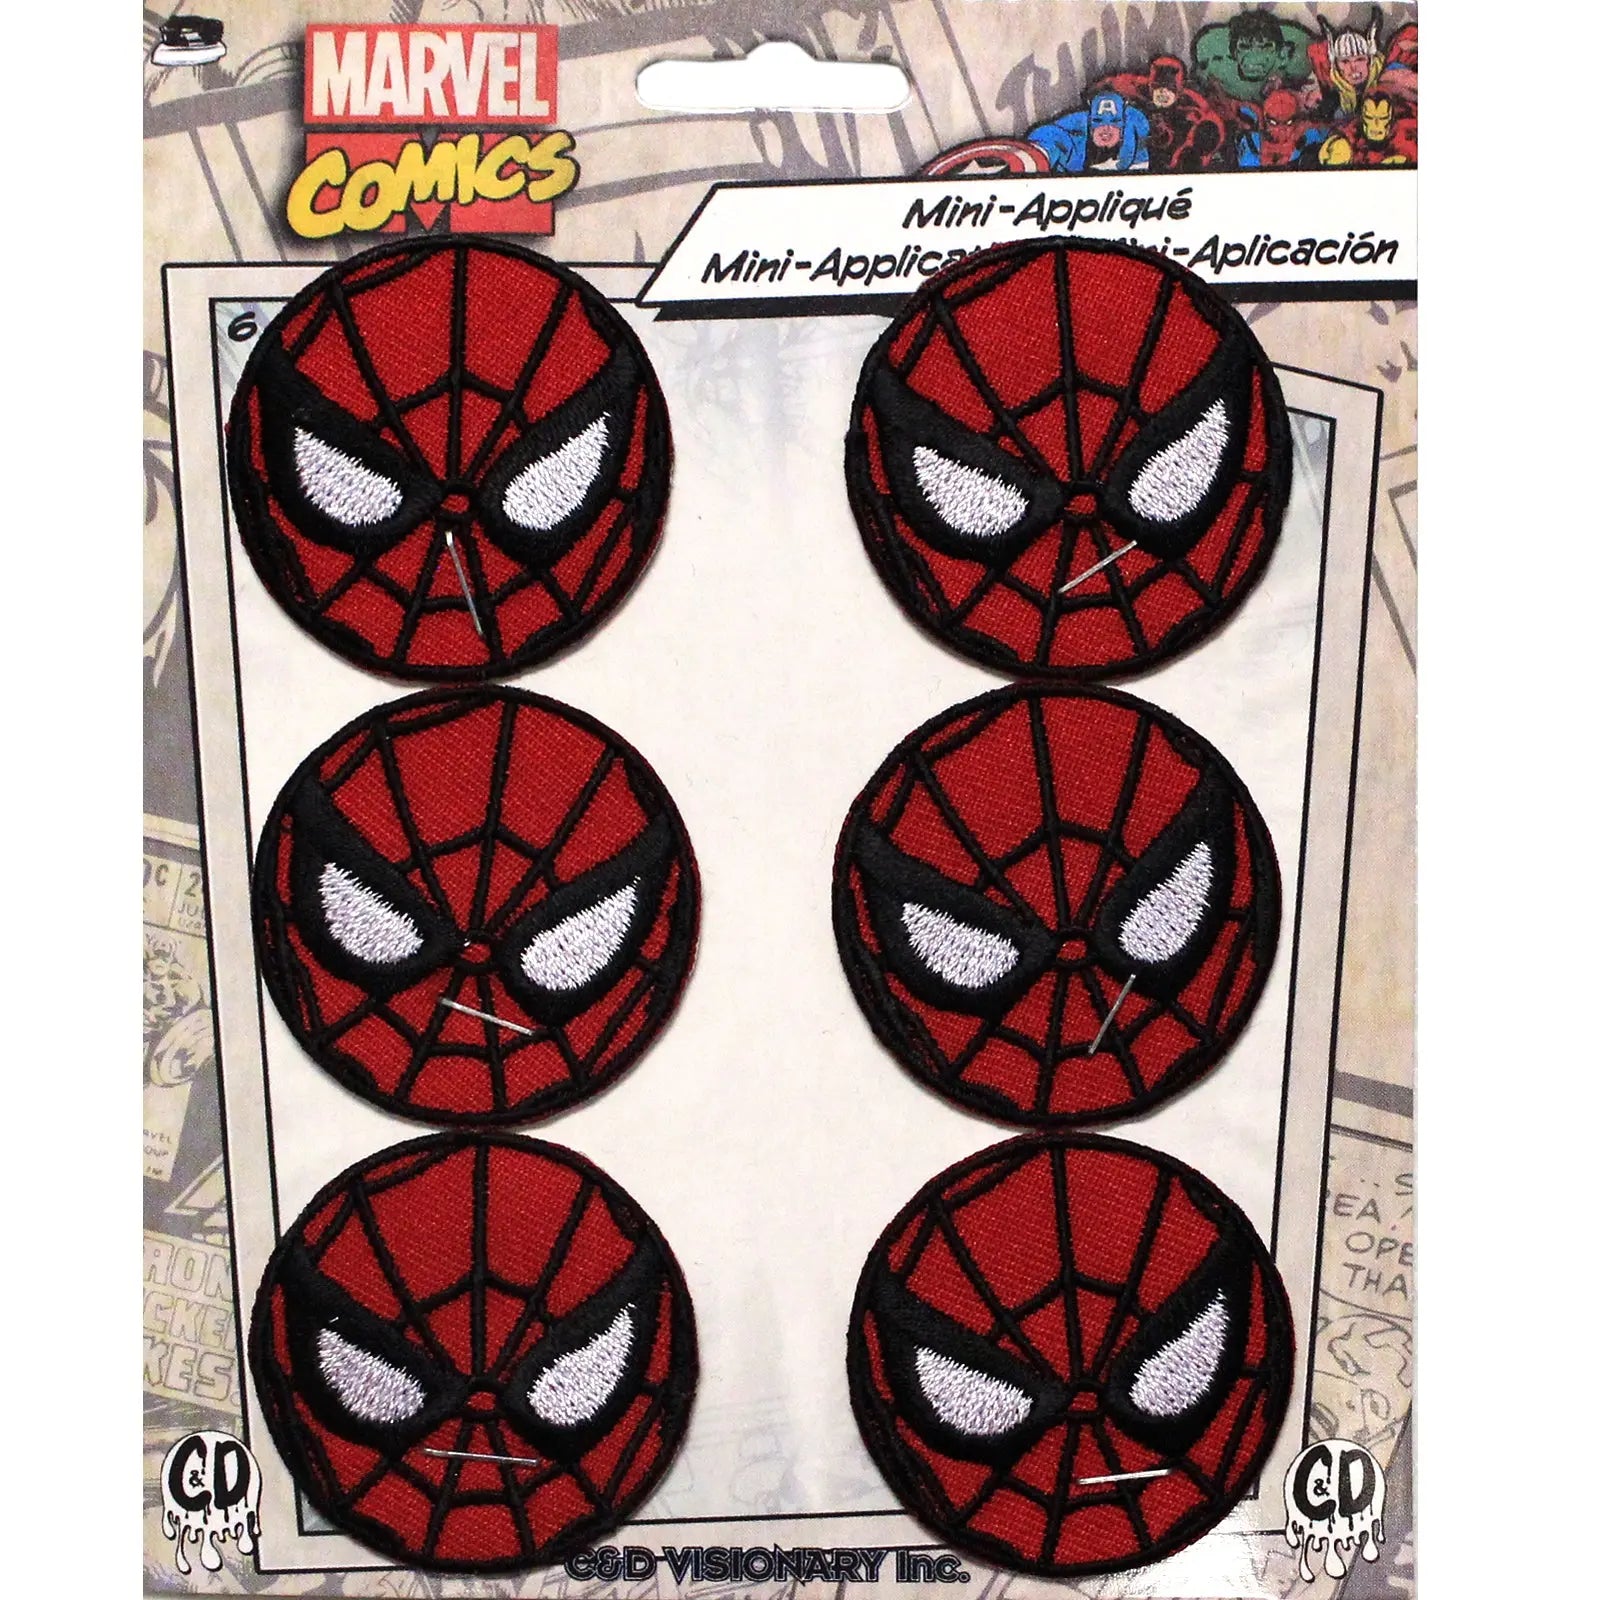 Marvel Avengers iron on patches, Spiderman patch, Iron Man patch